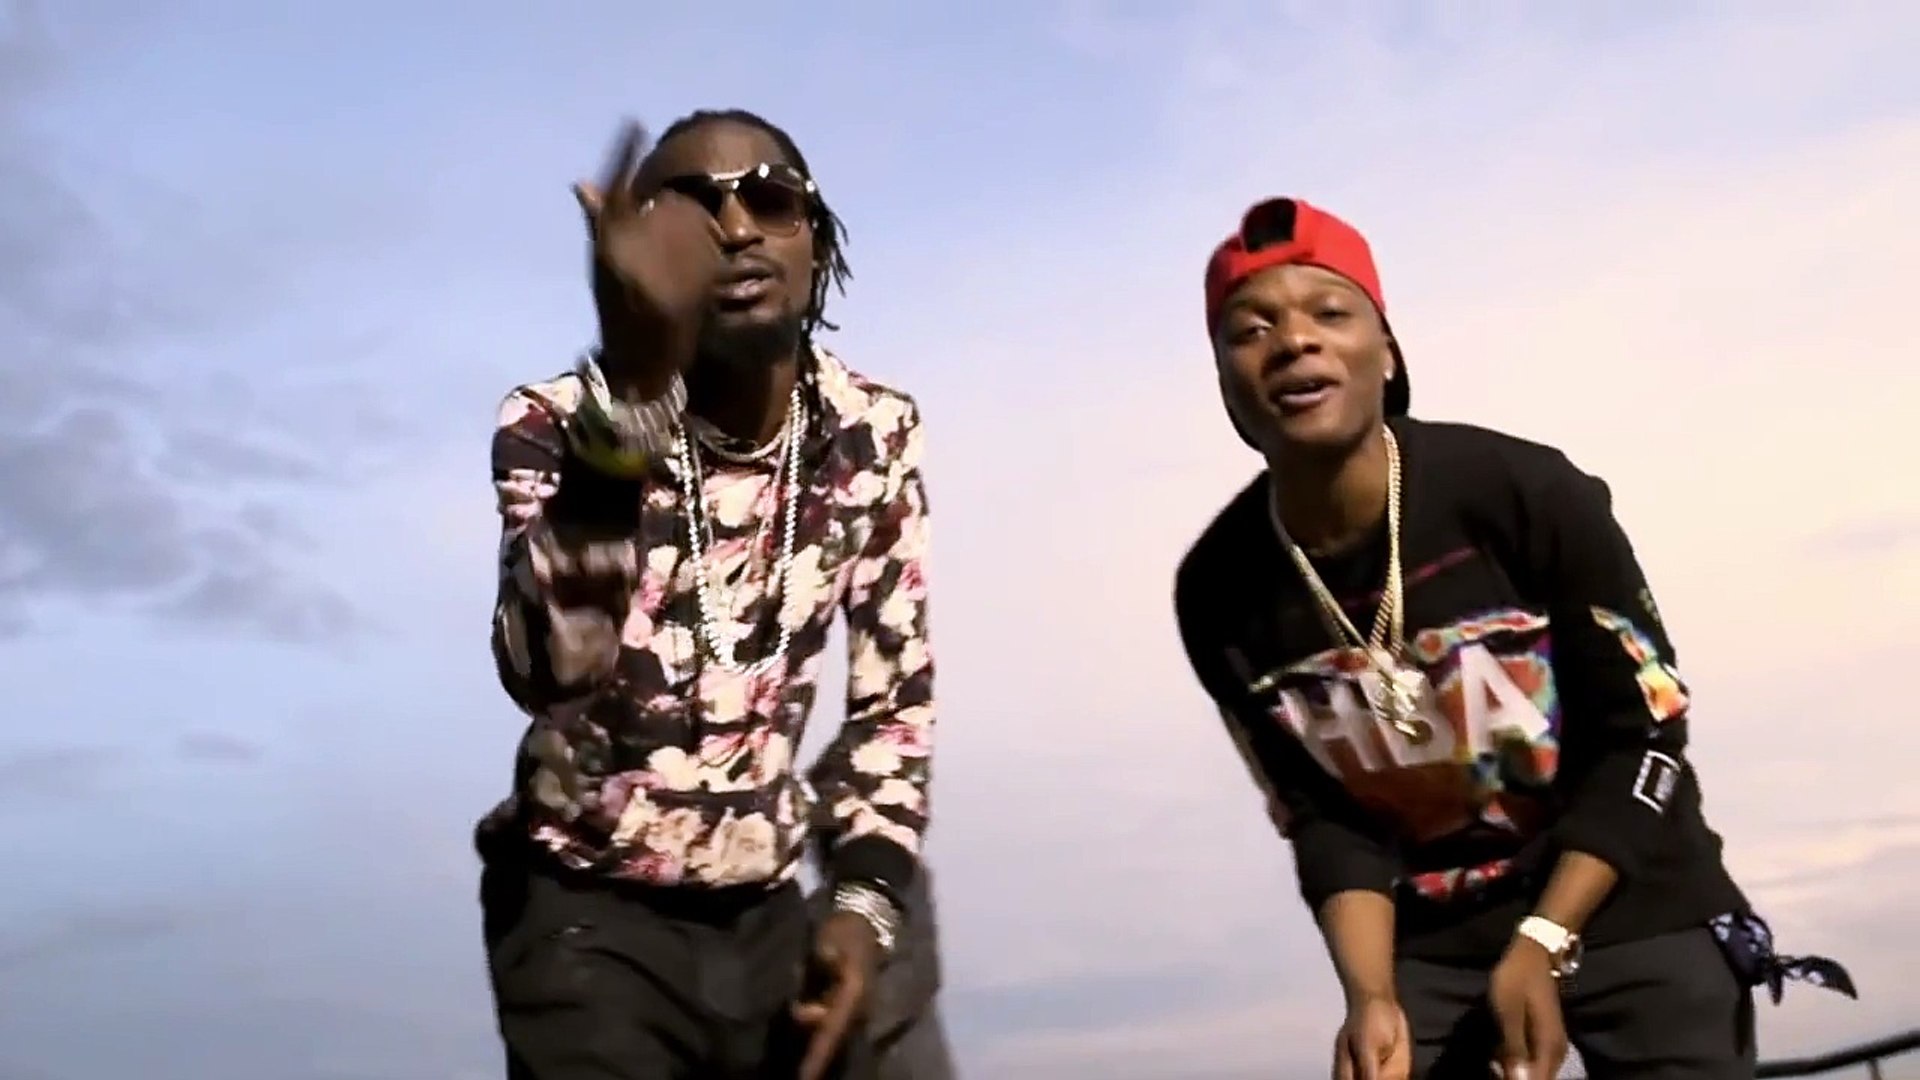 Radio and Weasel ft Wizkid with Don't Cry on OurMusiq,com Ugandan Music